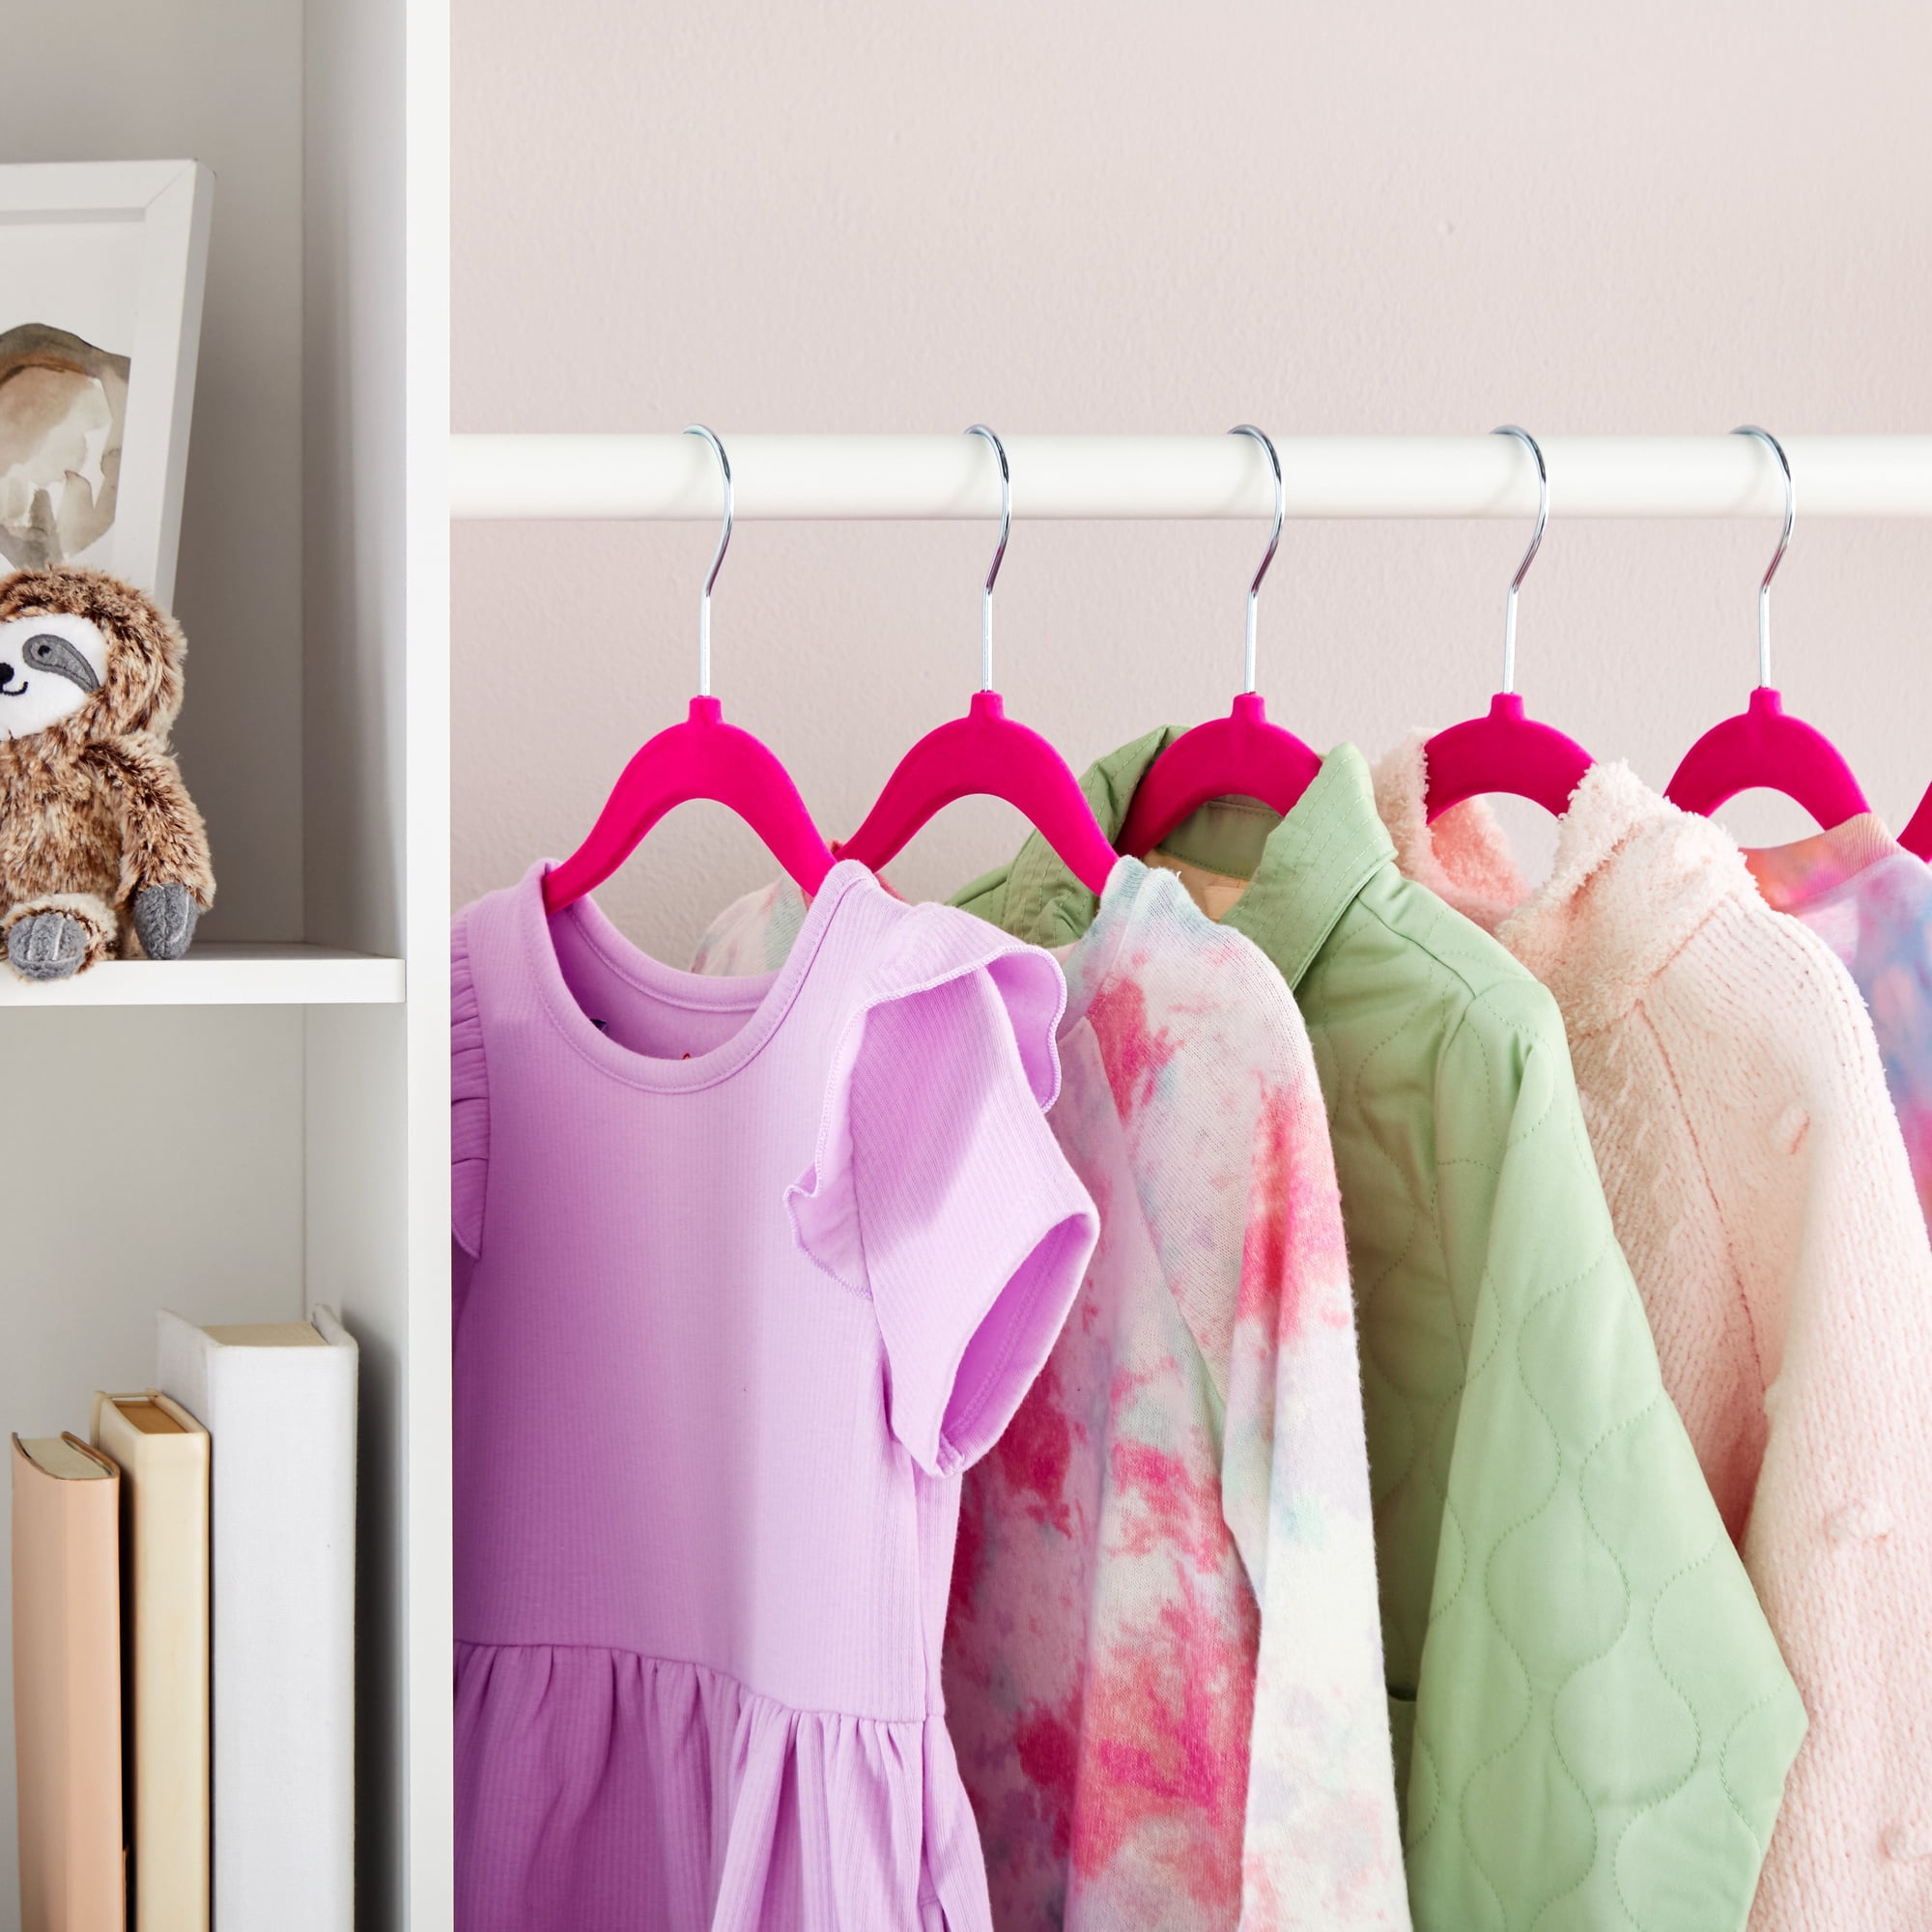 Hangers with Baby Clothes in Wardrobe Stock Image - Image of keeping,  hangers: 132765883